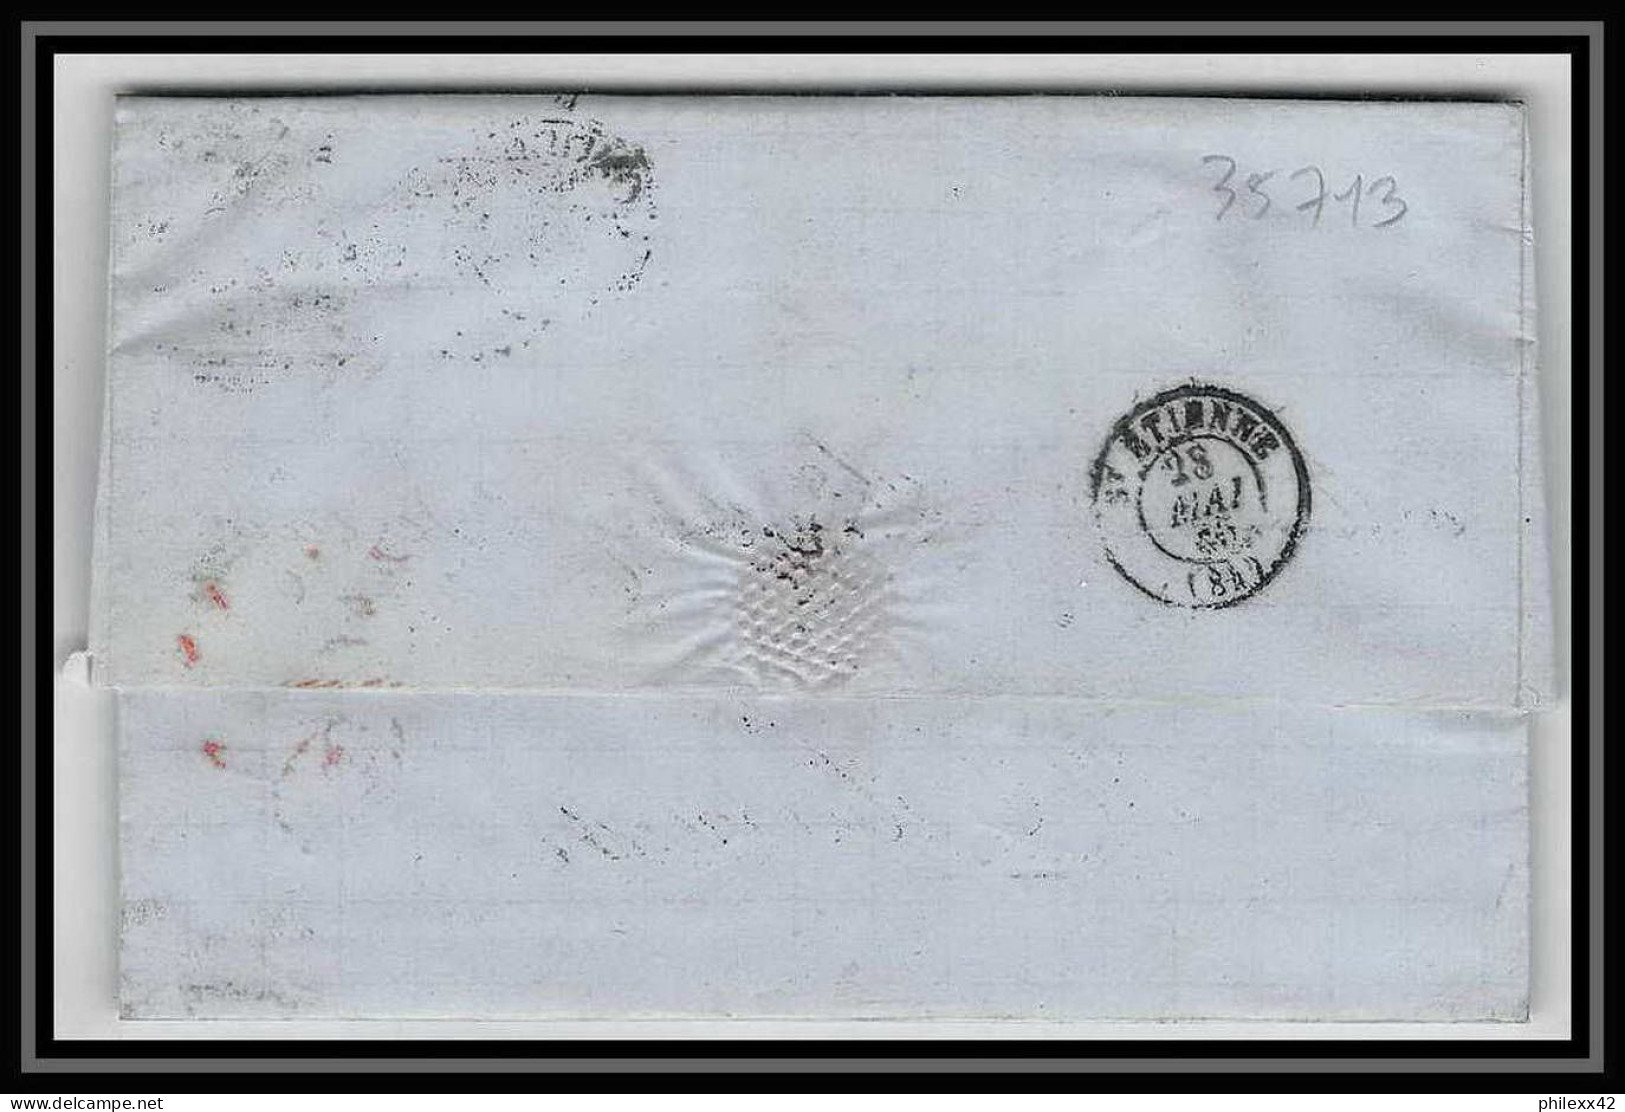 35713 N°32 Victoria 4p Red London St Etienne France 1865 Cachet 73 Lettre Cover Grande Bretagne England - Covers & Documents